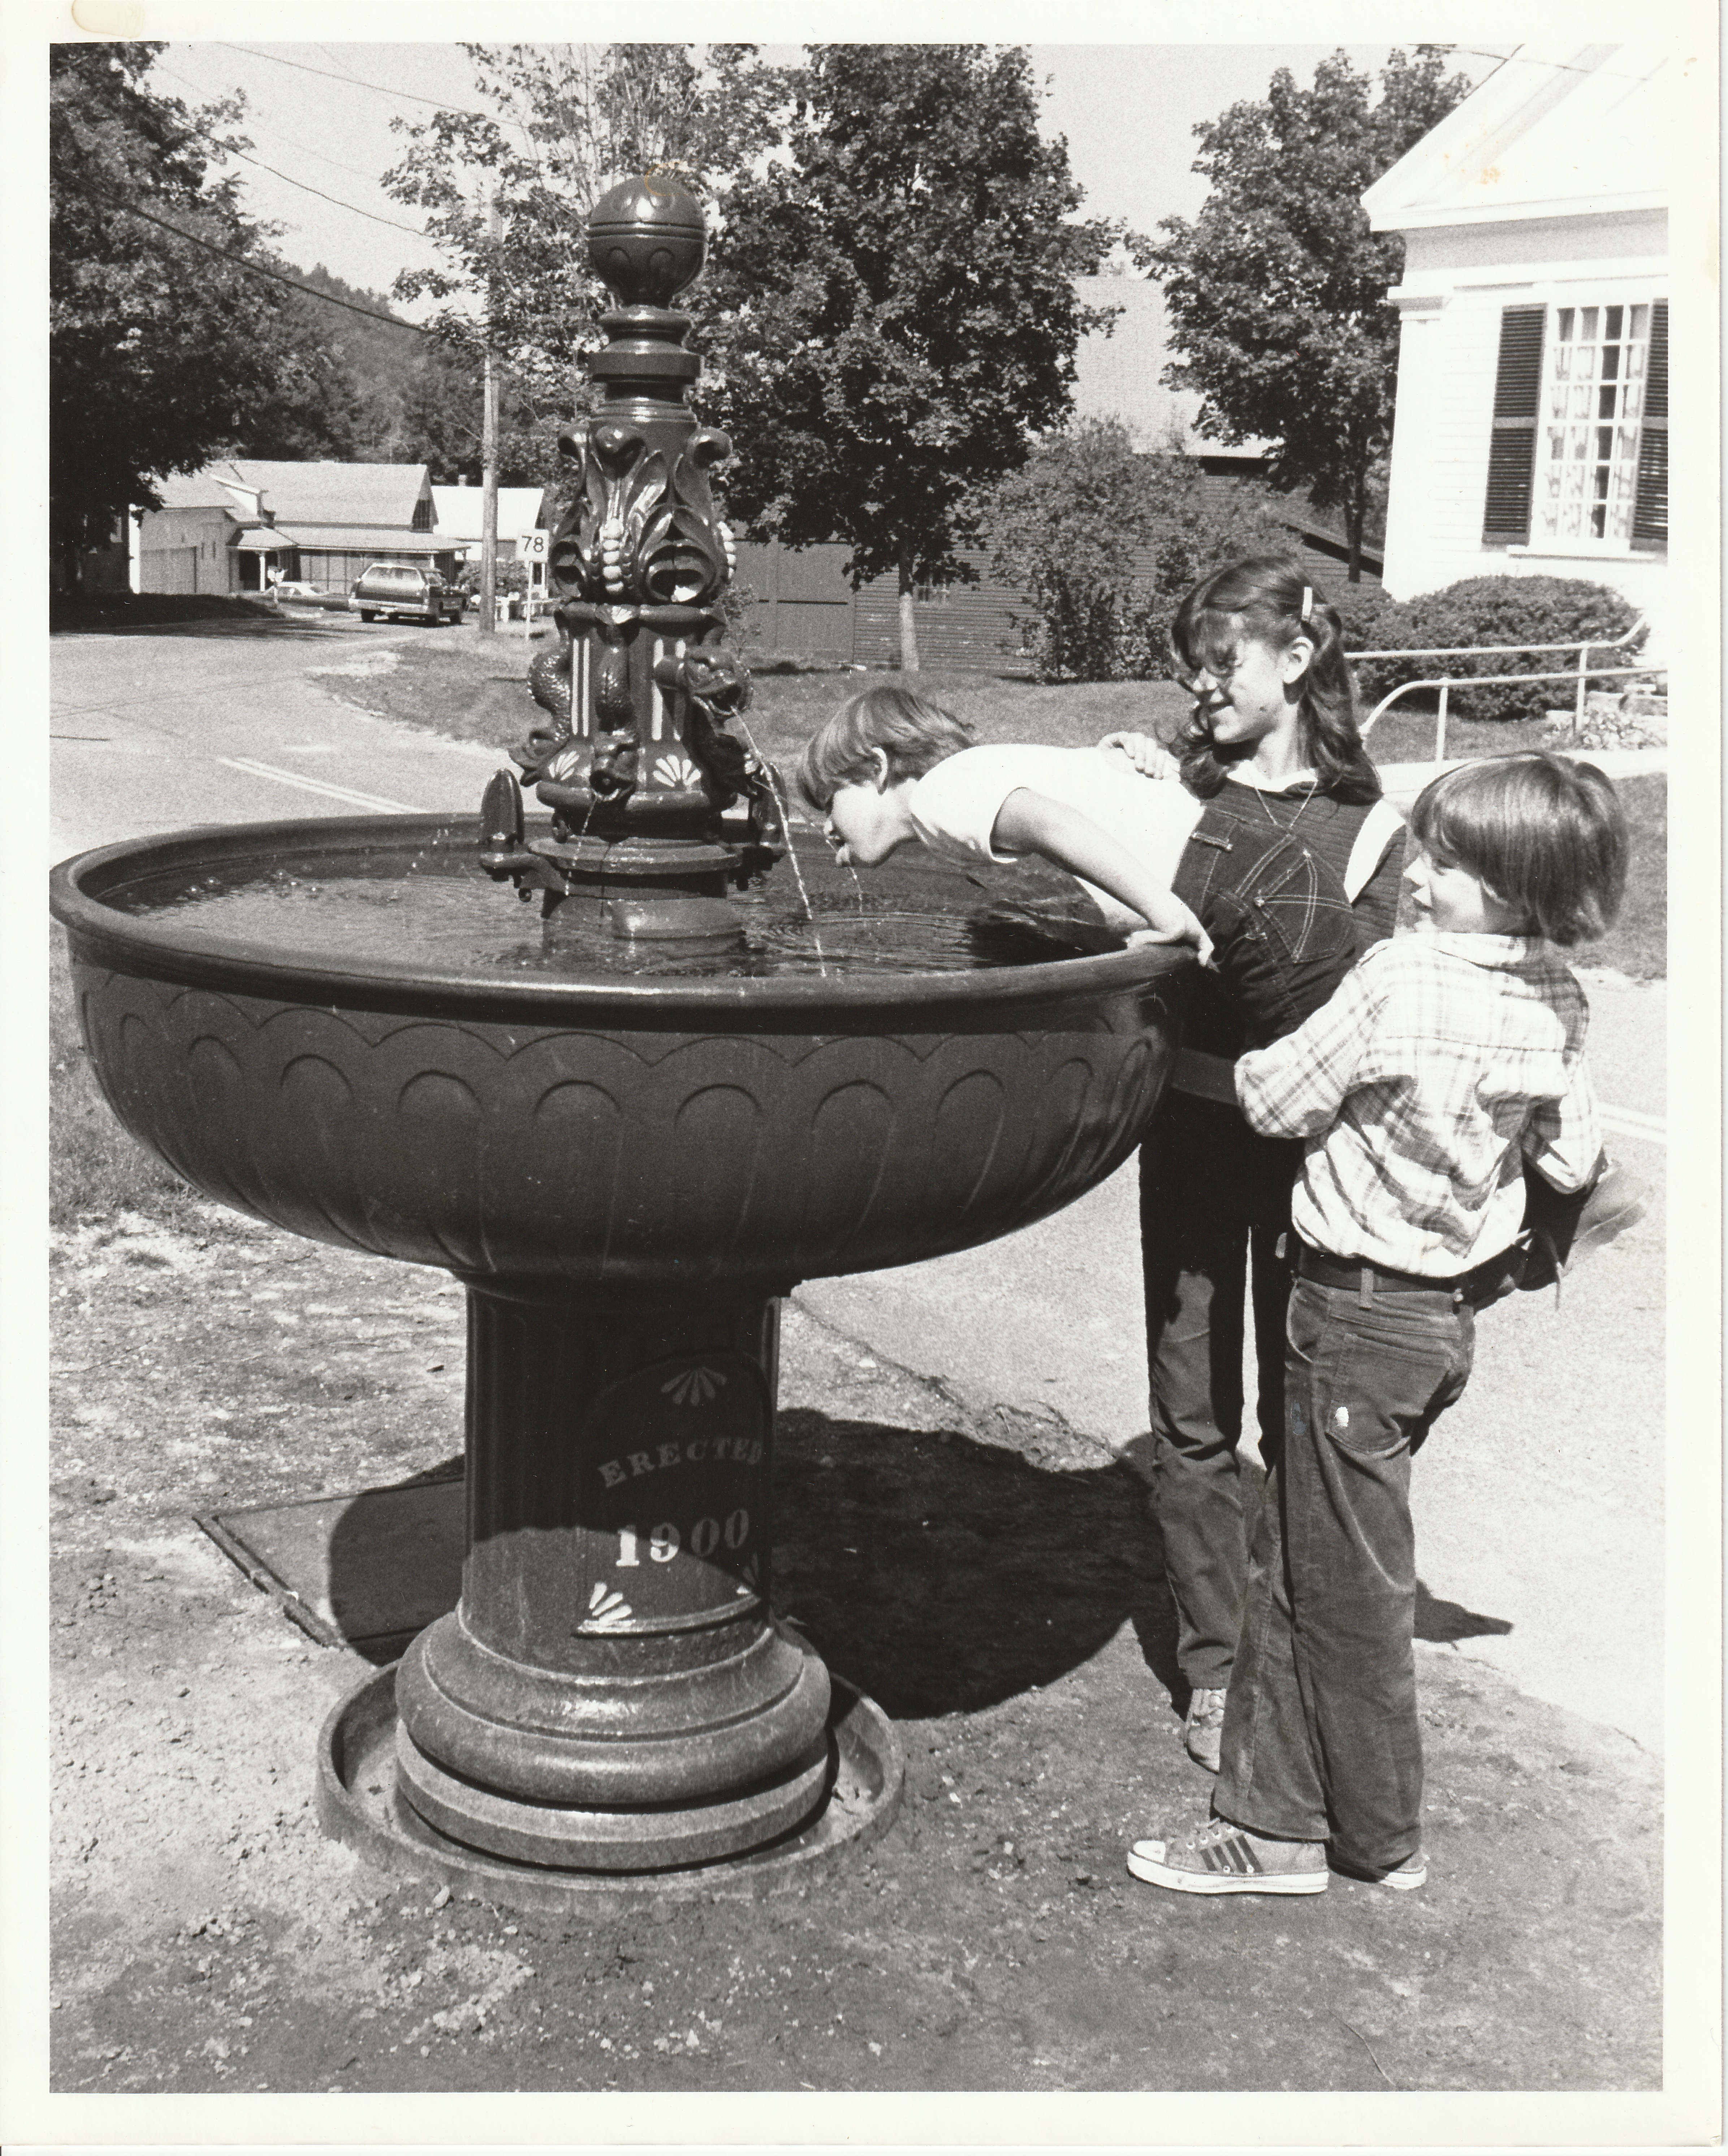 Image of Captain Ball's Fountain after repair work, September 1979. Children are Larry Kilroy, Jr., Jim Kilroy, and Kim Astrella.